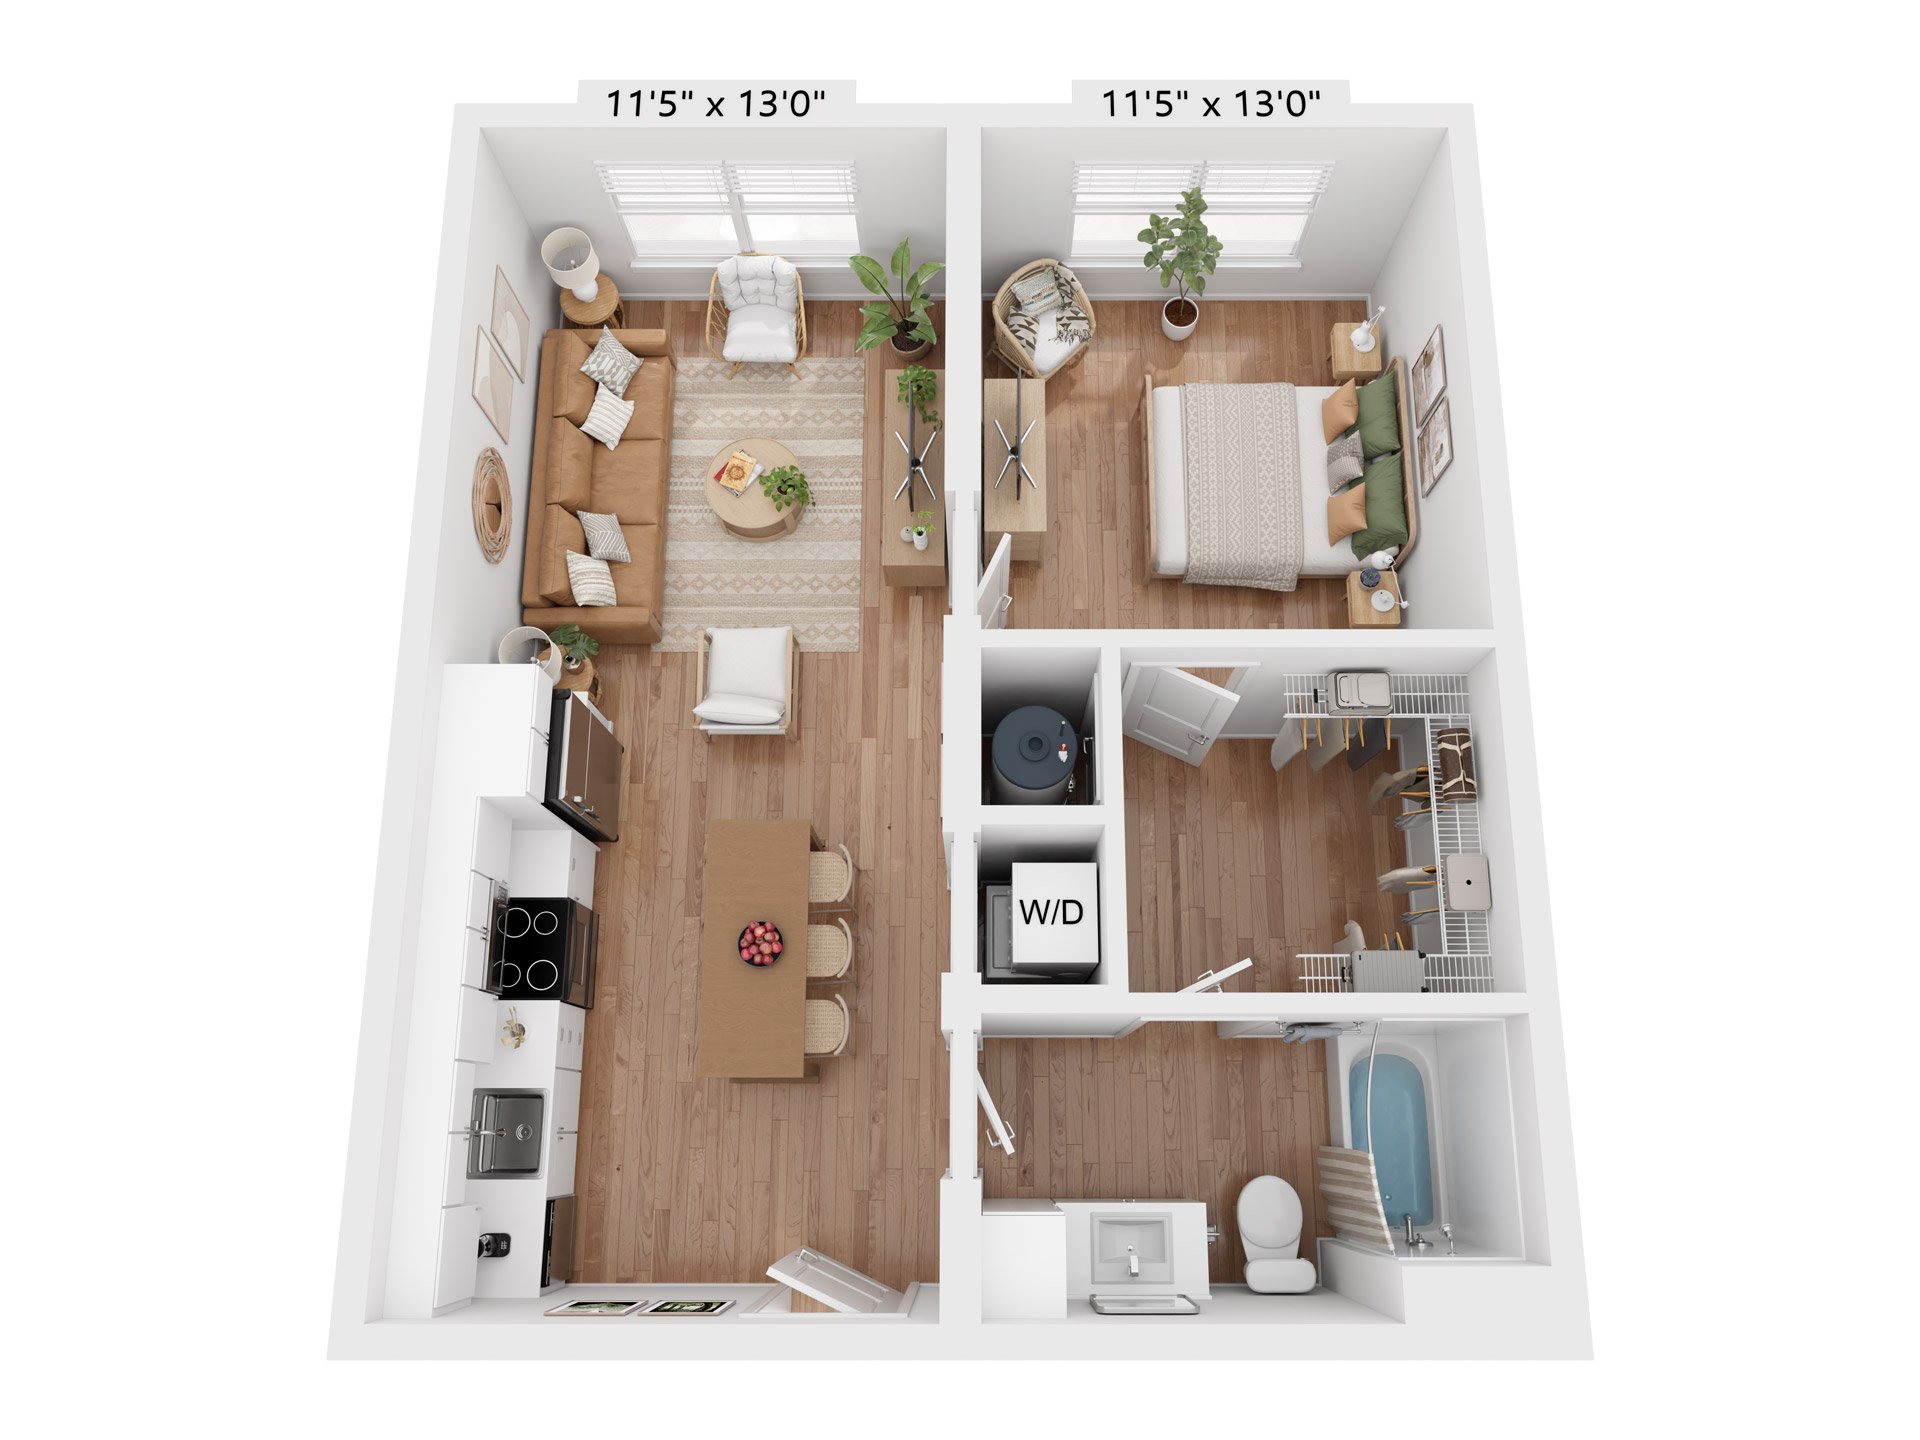 Floor plan map for a one bedroom apartment at Ltd. Findlay in Coraopolis, PA, featuring rooms with dimensions.